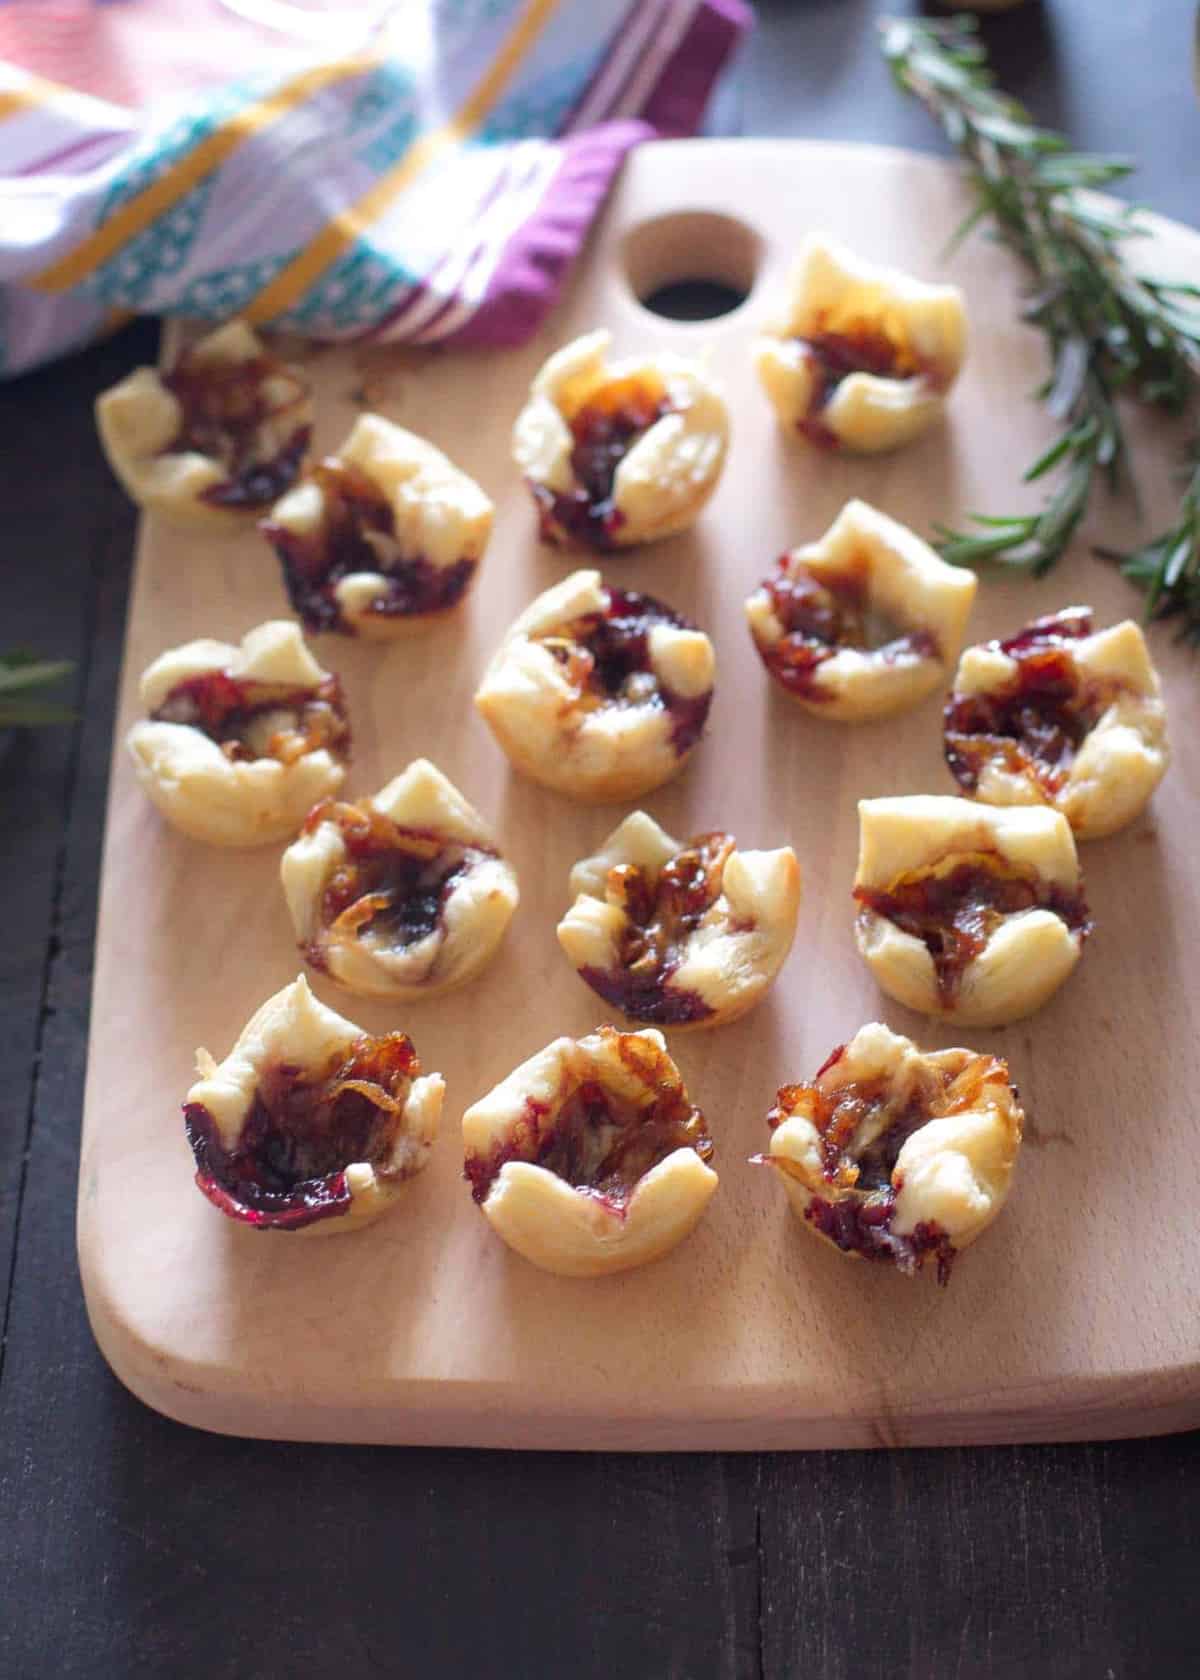 Savory Pastry Bites with Caramelized Onions and Gouda on a wooden tray